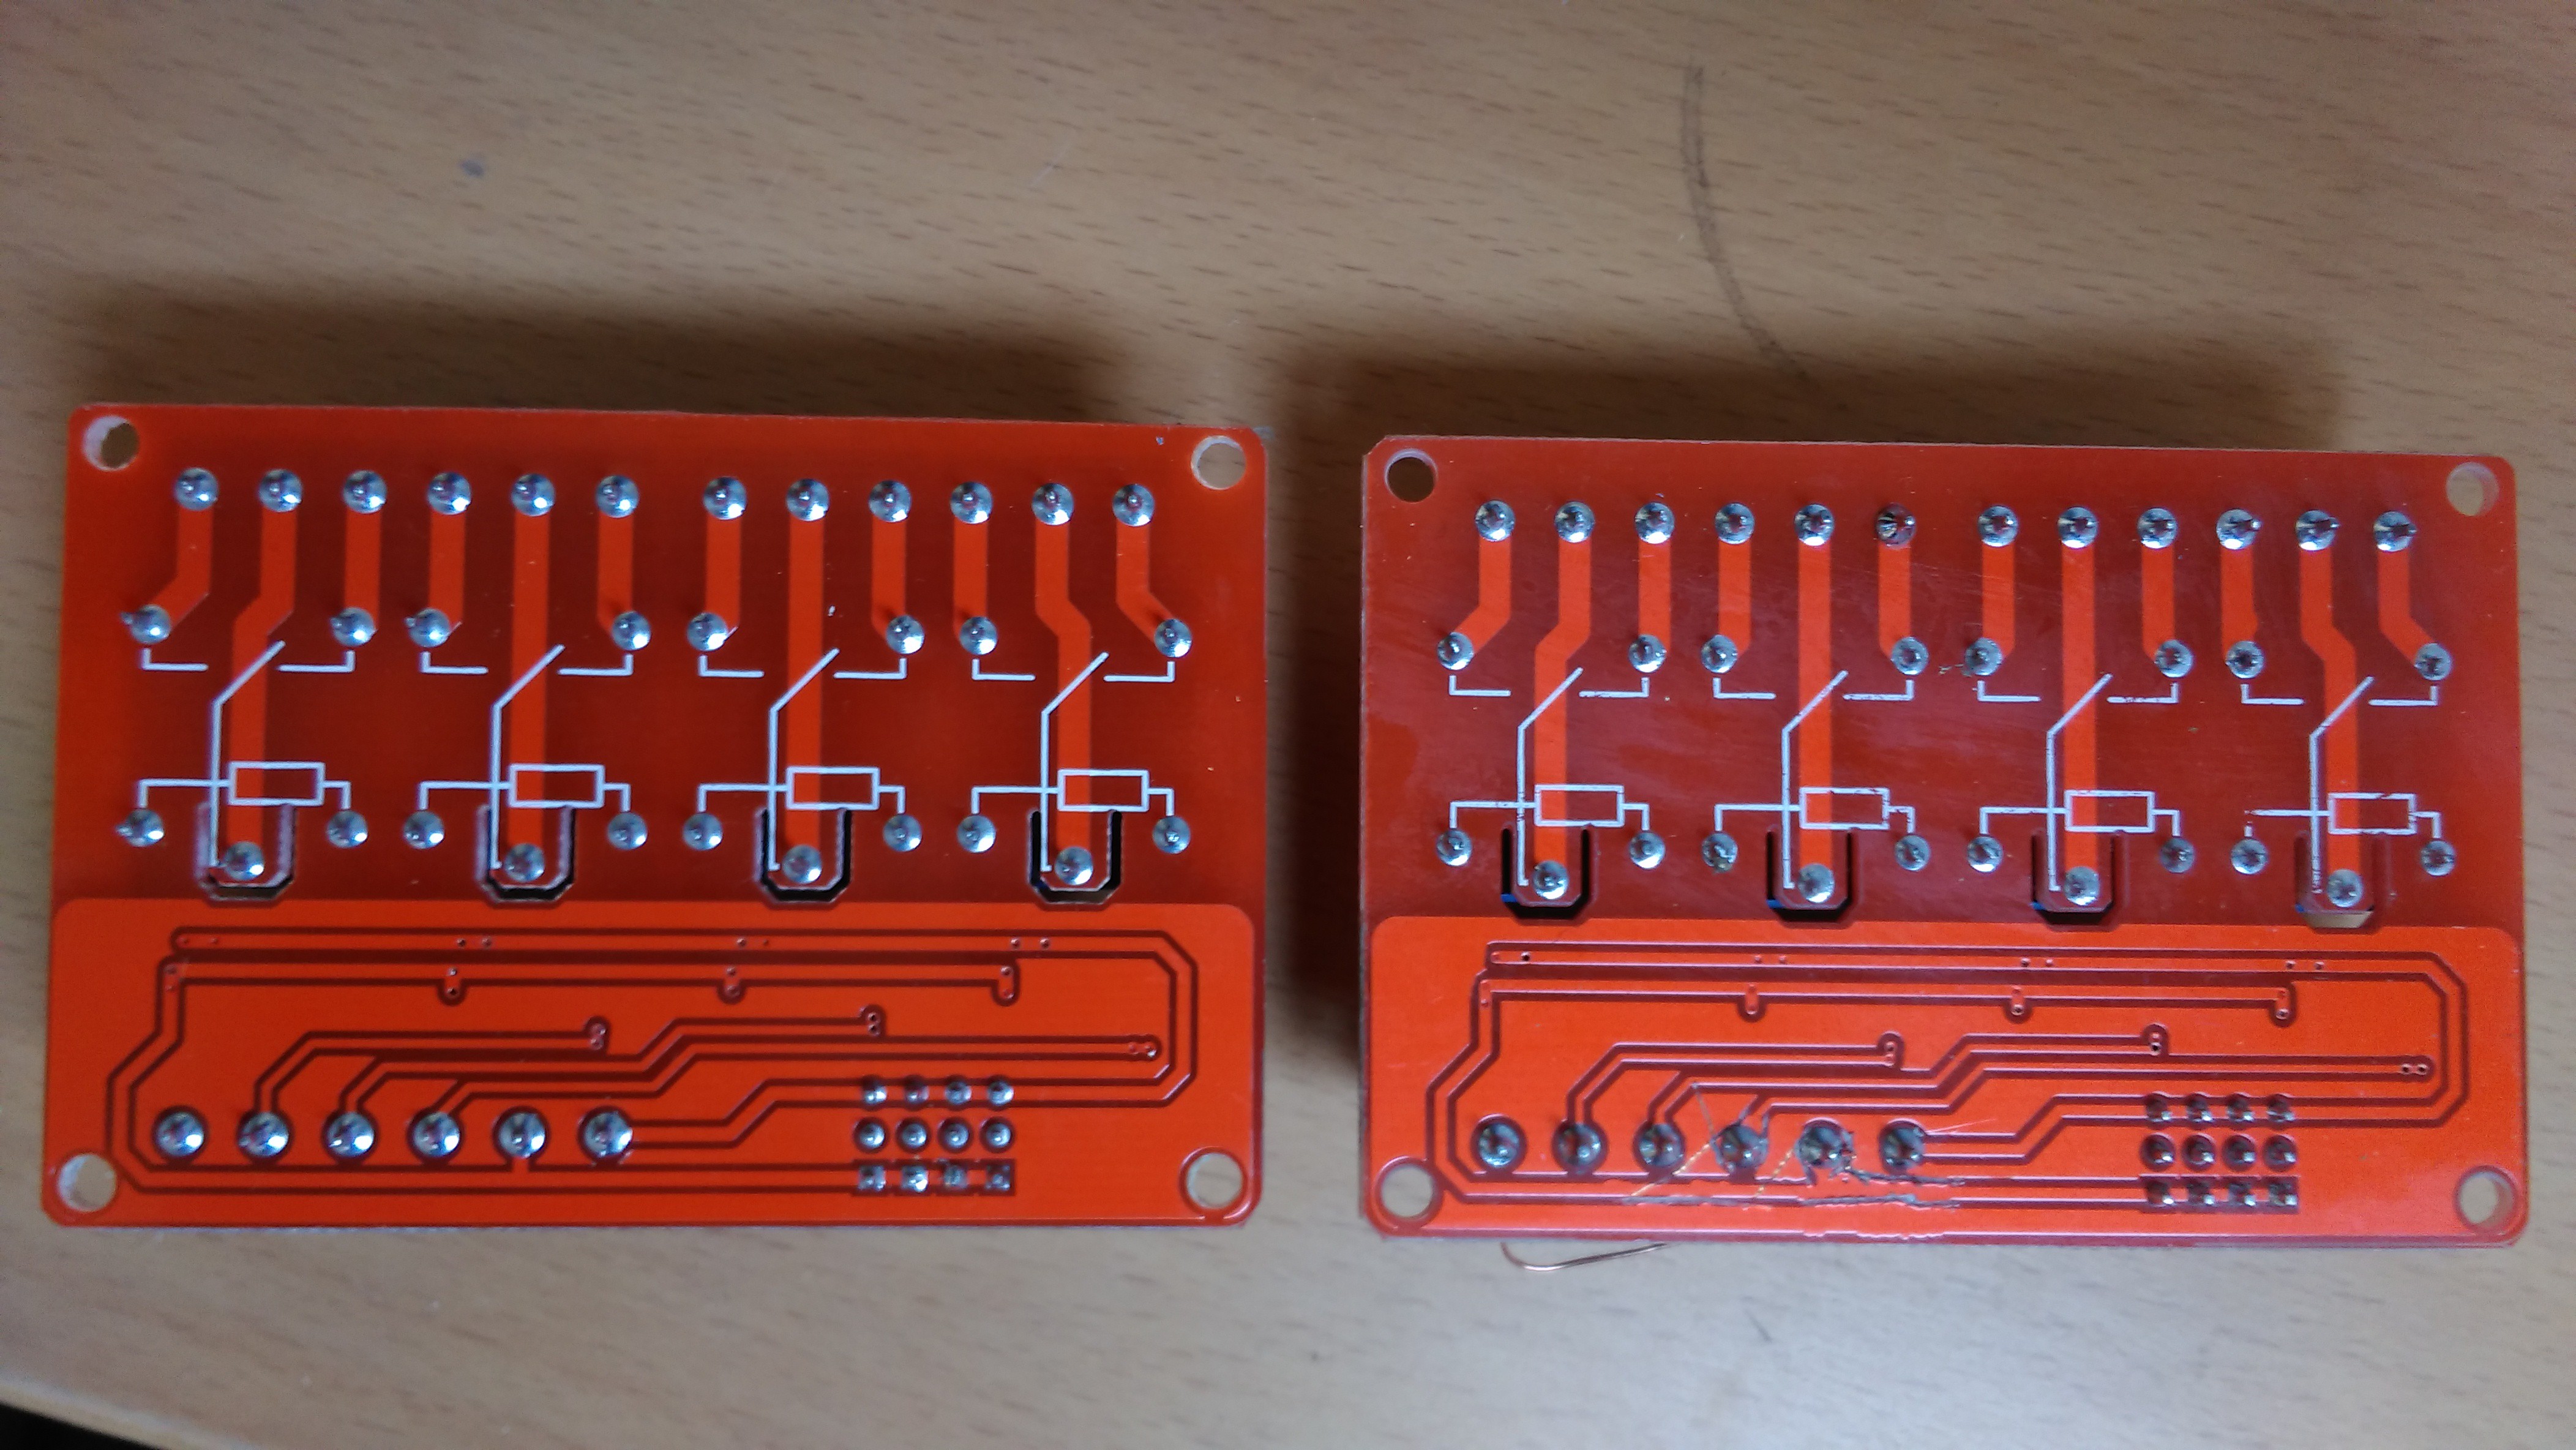 Rear of two relay module PCB